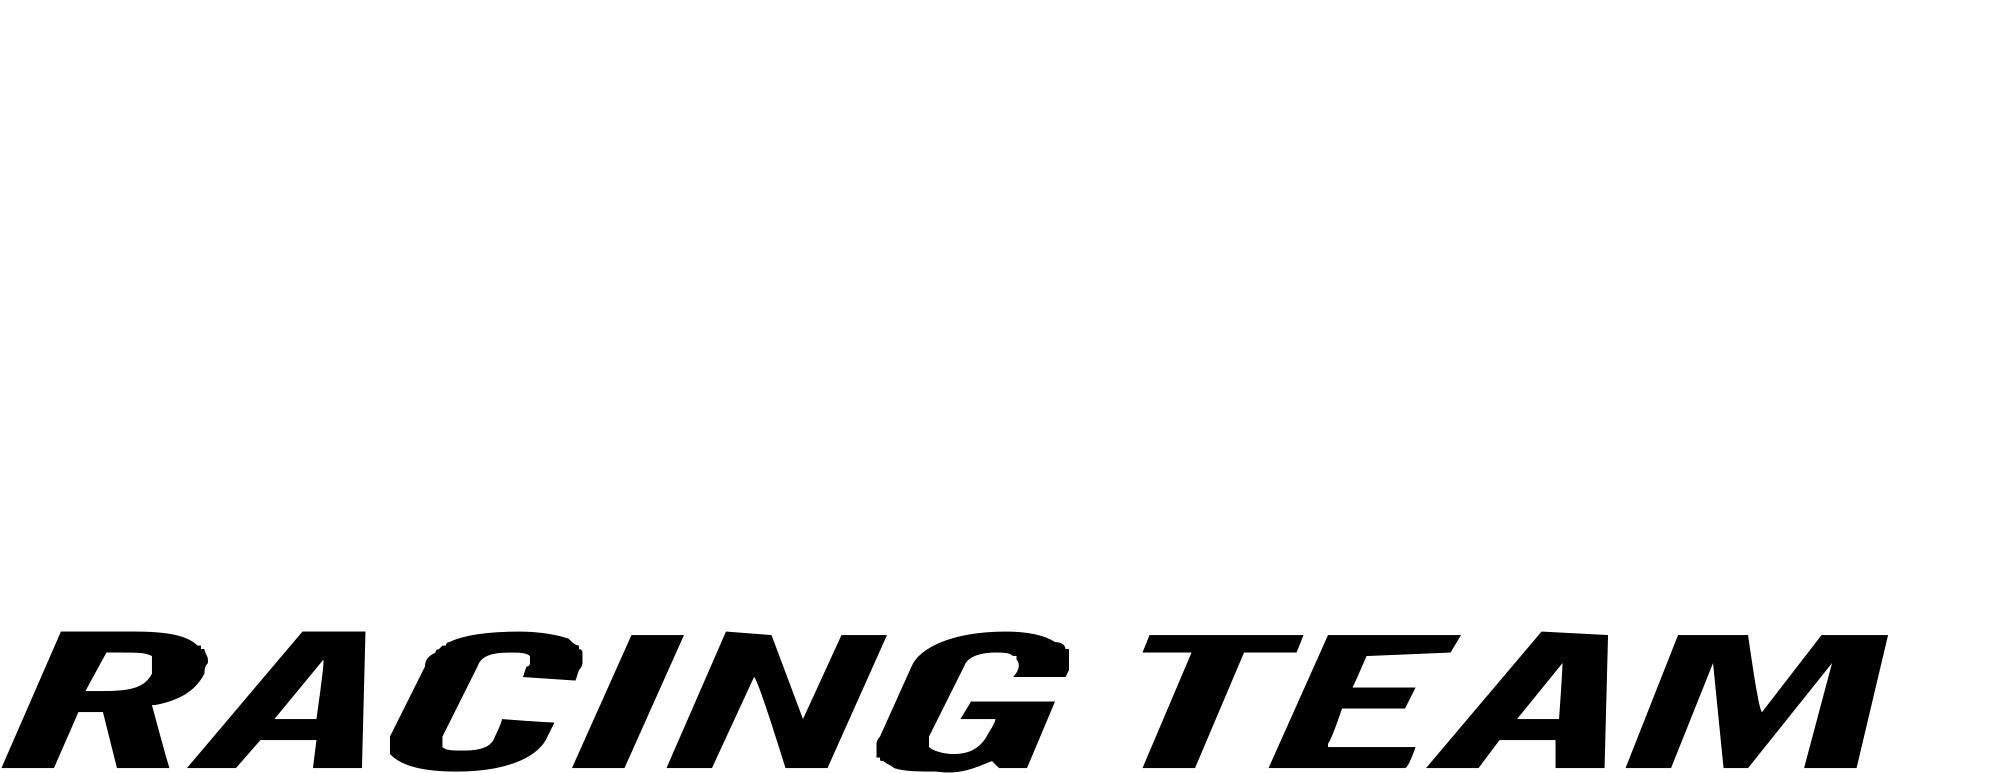 Ktm Racing Team Logo Black And White - Transparency (2400x2400), Png Download